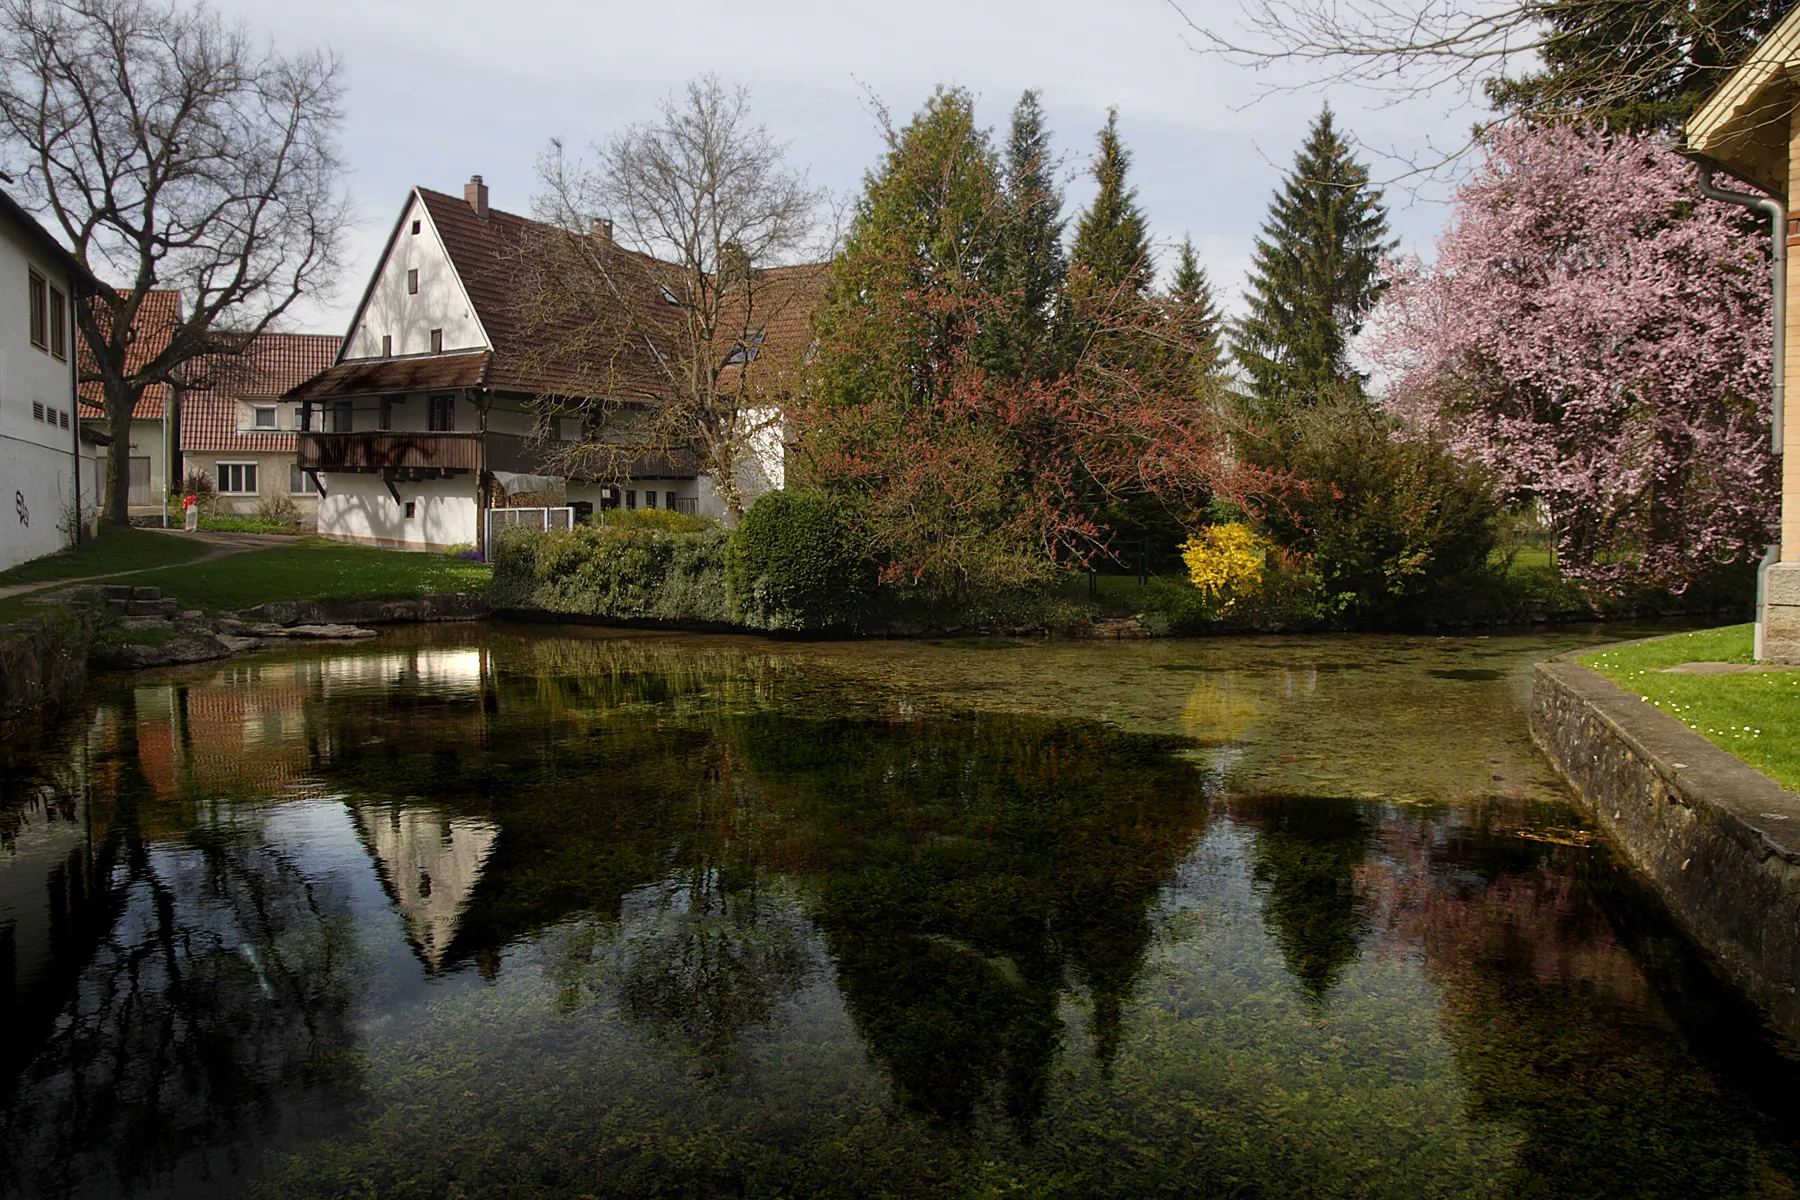 Photo showing: karst spring “Löffelbrunnen“ in the center of Langenau, Swabian Alb (for the karst spring of river Nau in Langenau see the photo: Image:Nau_Karstquelltopf_Langenau_Schwaebische Alb.jpg). The area next after Ulm/Langenau is a permanent wetland of ca. 7,5x15 km, devided by the border Baden-Württemberg and Bavaria. In this area the meltwater of the pleistocene river  Upper Danube transported gravel, over time forming gravel beds of enormous size, functioning as a groundwater reservoir, which kept the surface a wetland.
This kind of “full water tub” contains the karst waters of the southeastern Swabian Alb, mainly from river Lone and its dry valley-tributaries. This river network meanwhile percolates ca. 80% of its precipitation underground to the wetland area of the Danube.
Four large karst springs in Langenau, the biotope/geotope]/natural monument Grimmensee, the Naturschutzgebiet “Langenauer Ried”, „Leipheimer Moos” and “Gundelfinger Moos” are legally protected.